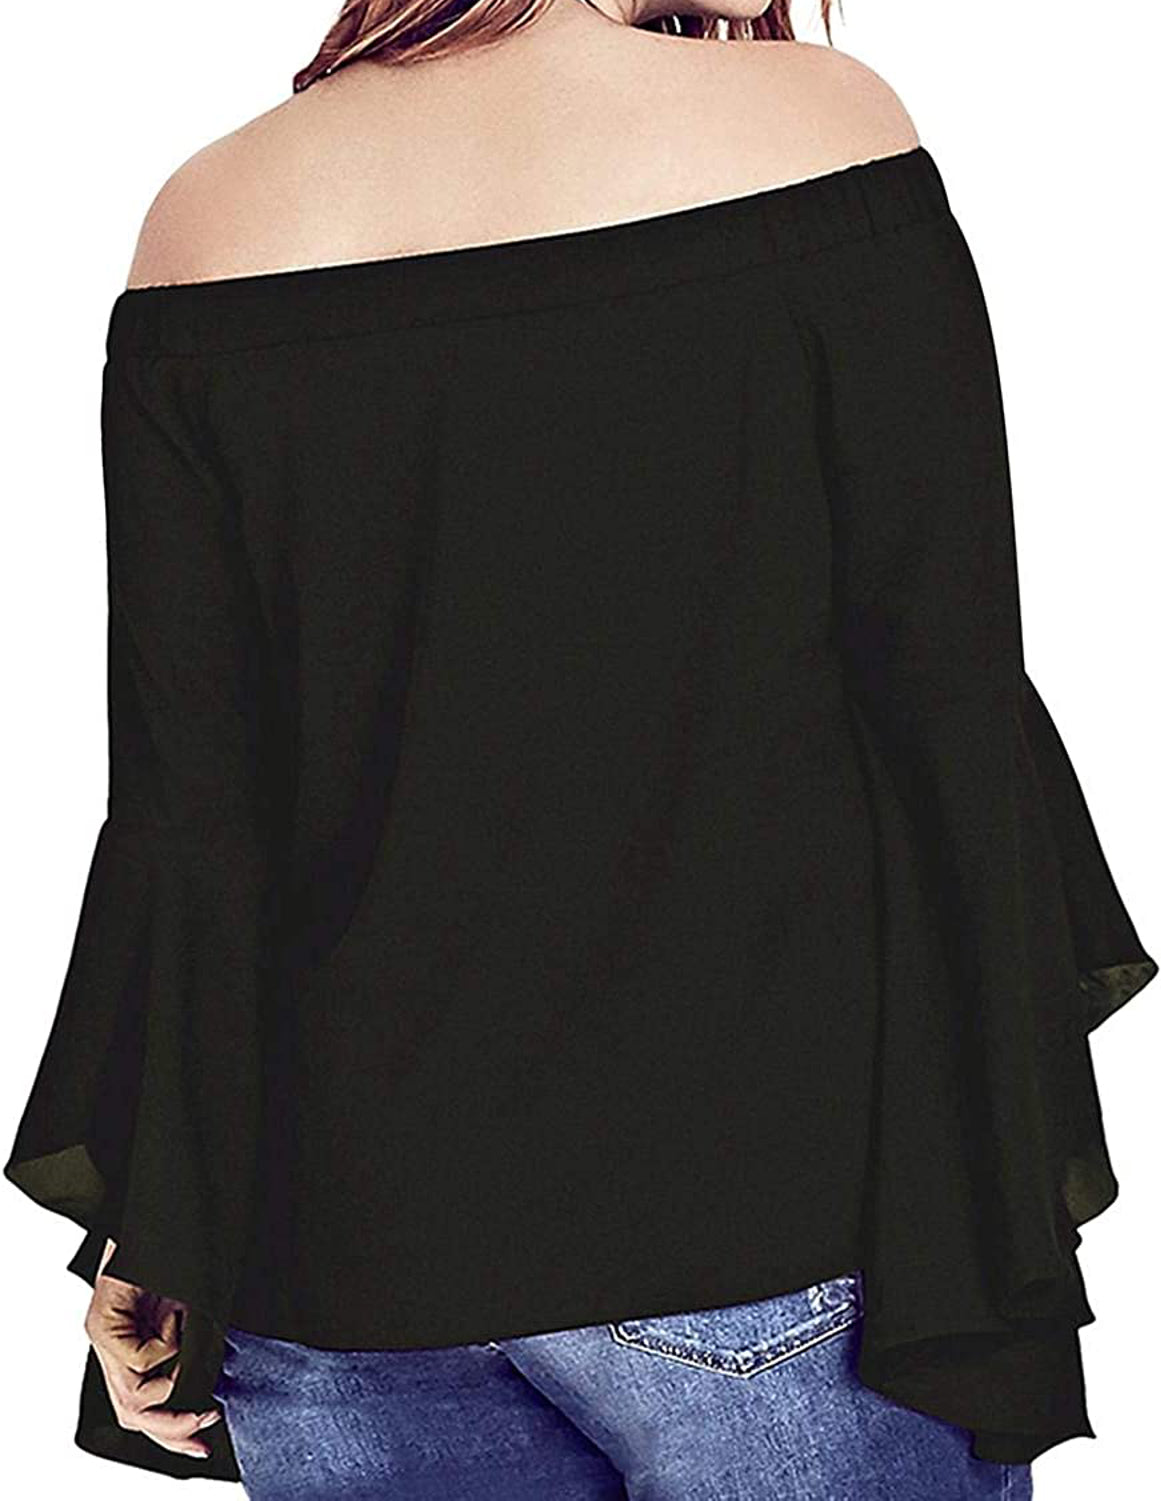 City Chic Womens Off The Shoulder Ruffled Sleeves Casual Top